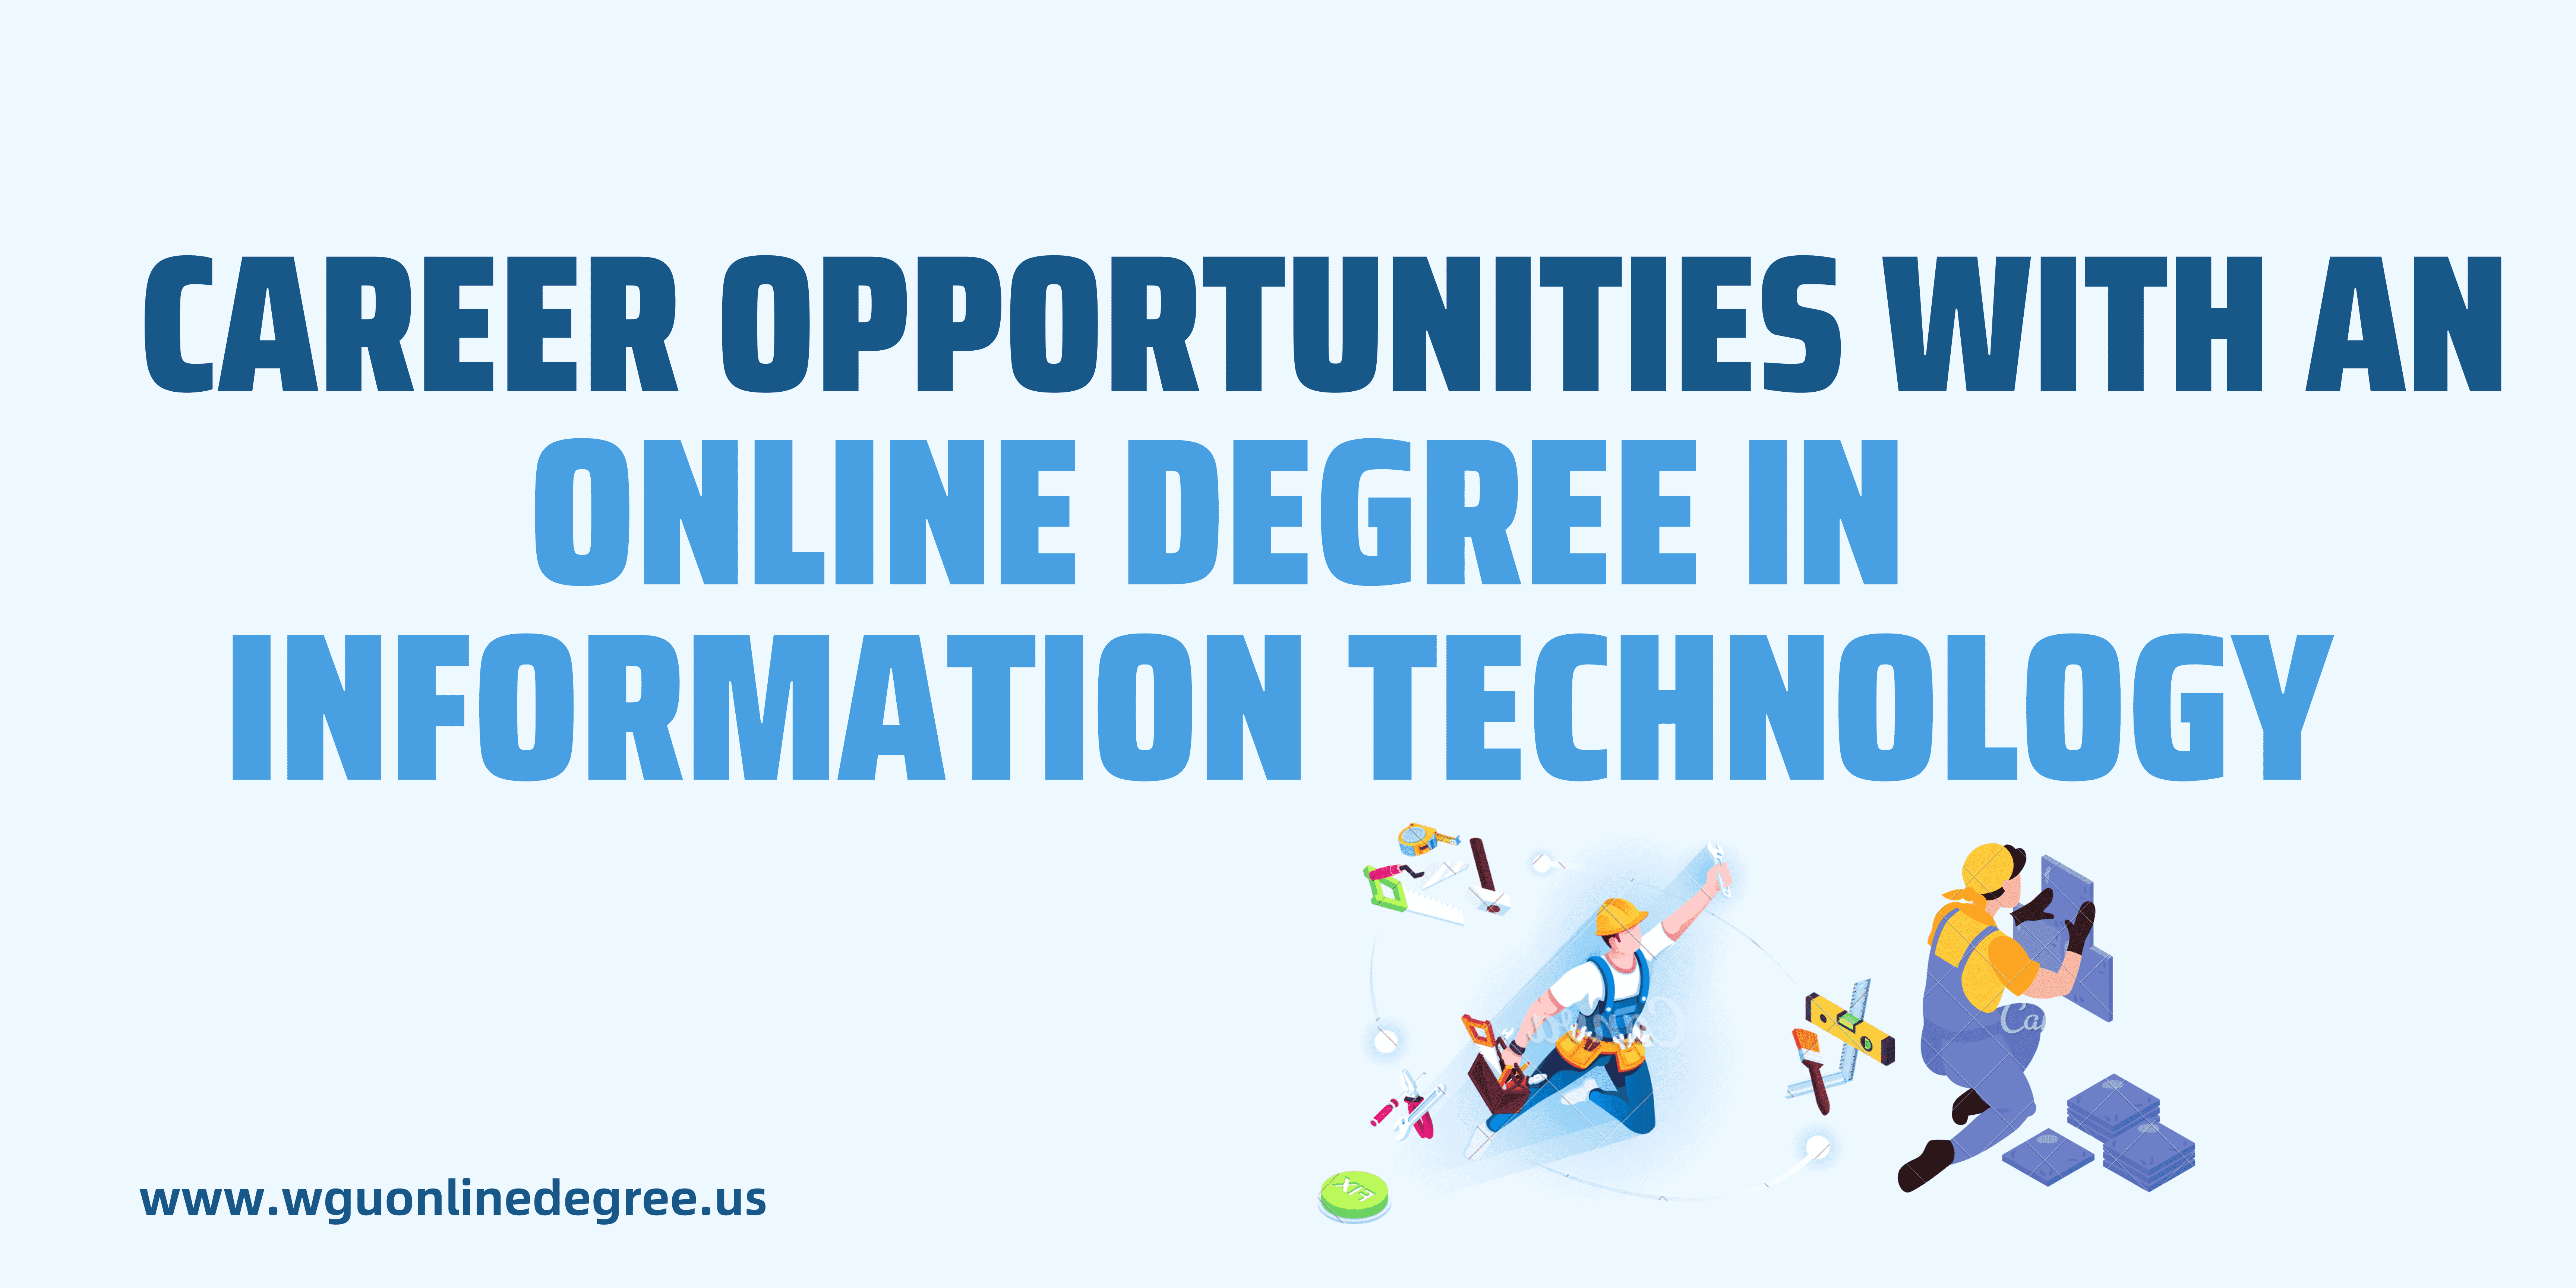 Career Opportunities with an Online Degree in Information Technology